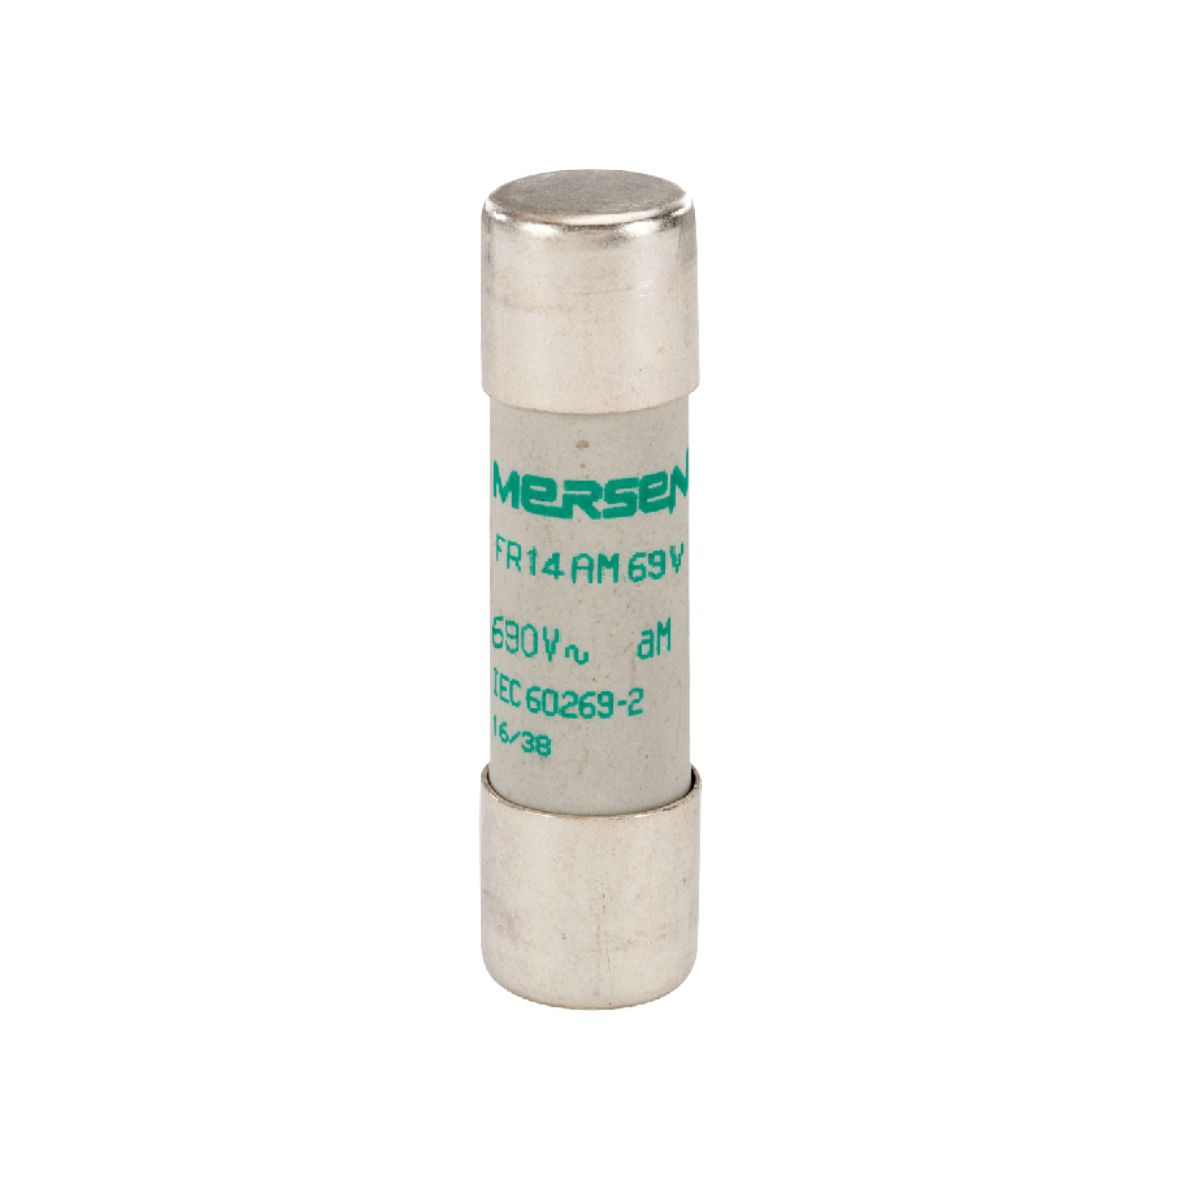 S215135 - Cylindrical fuse-link aM 690VAC 14.3x51, 6A